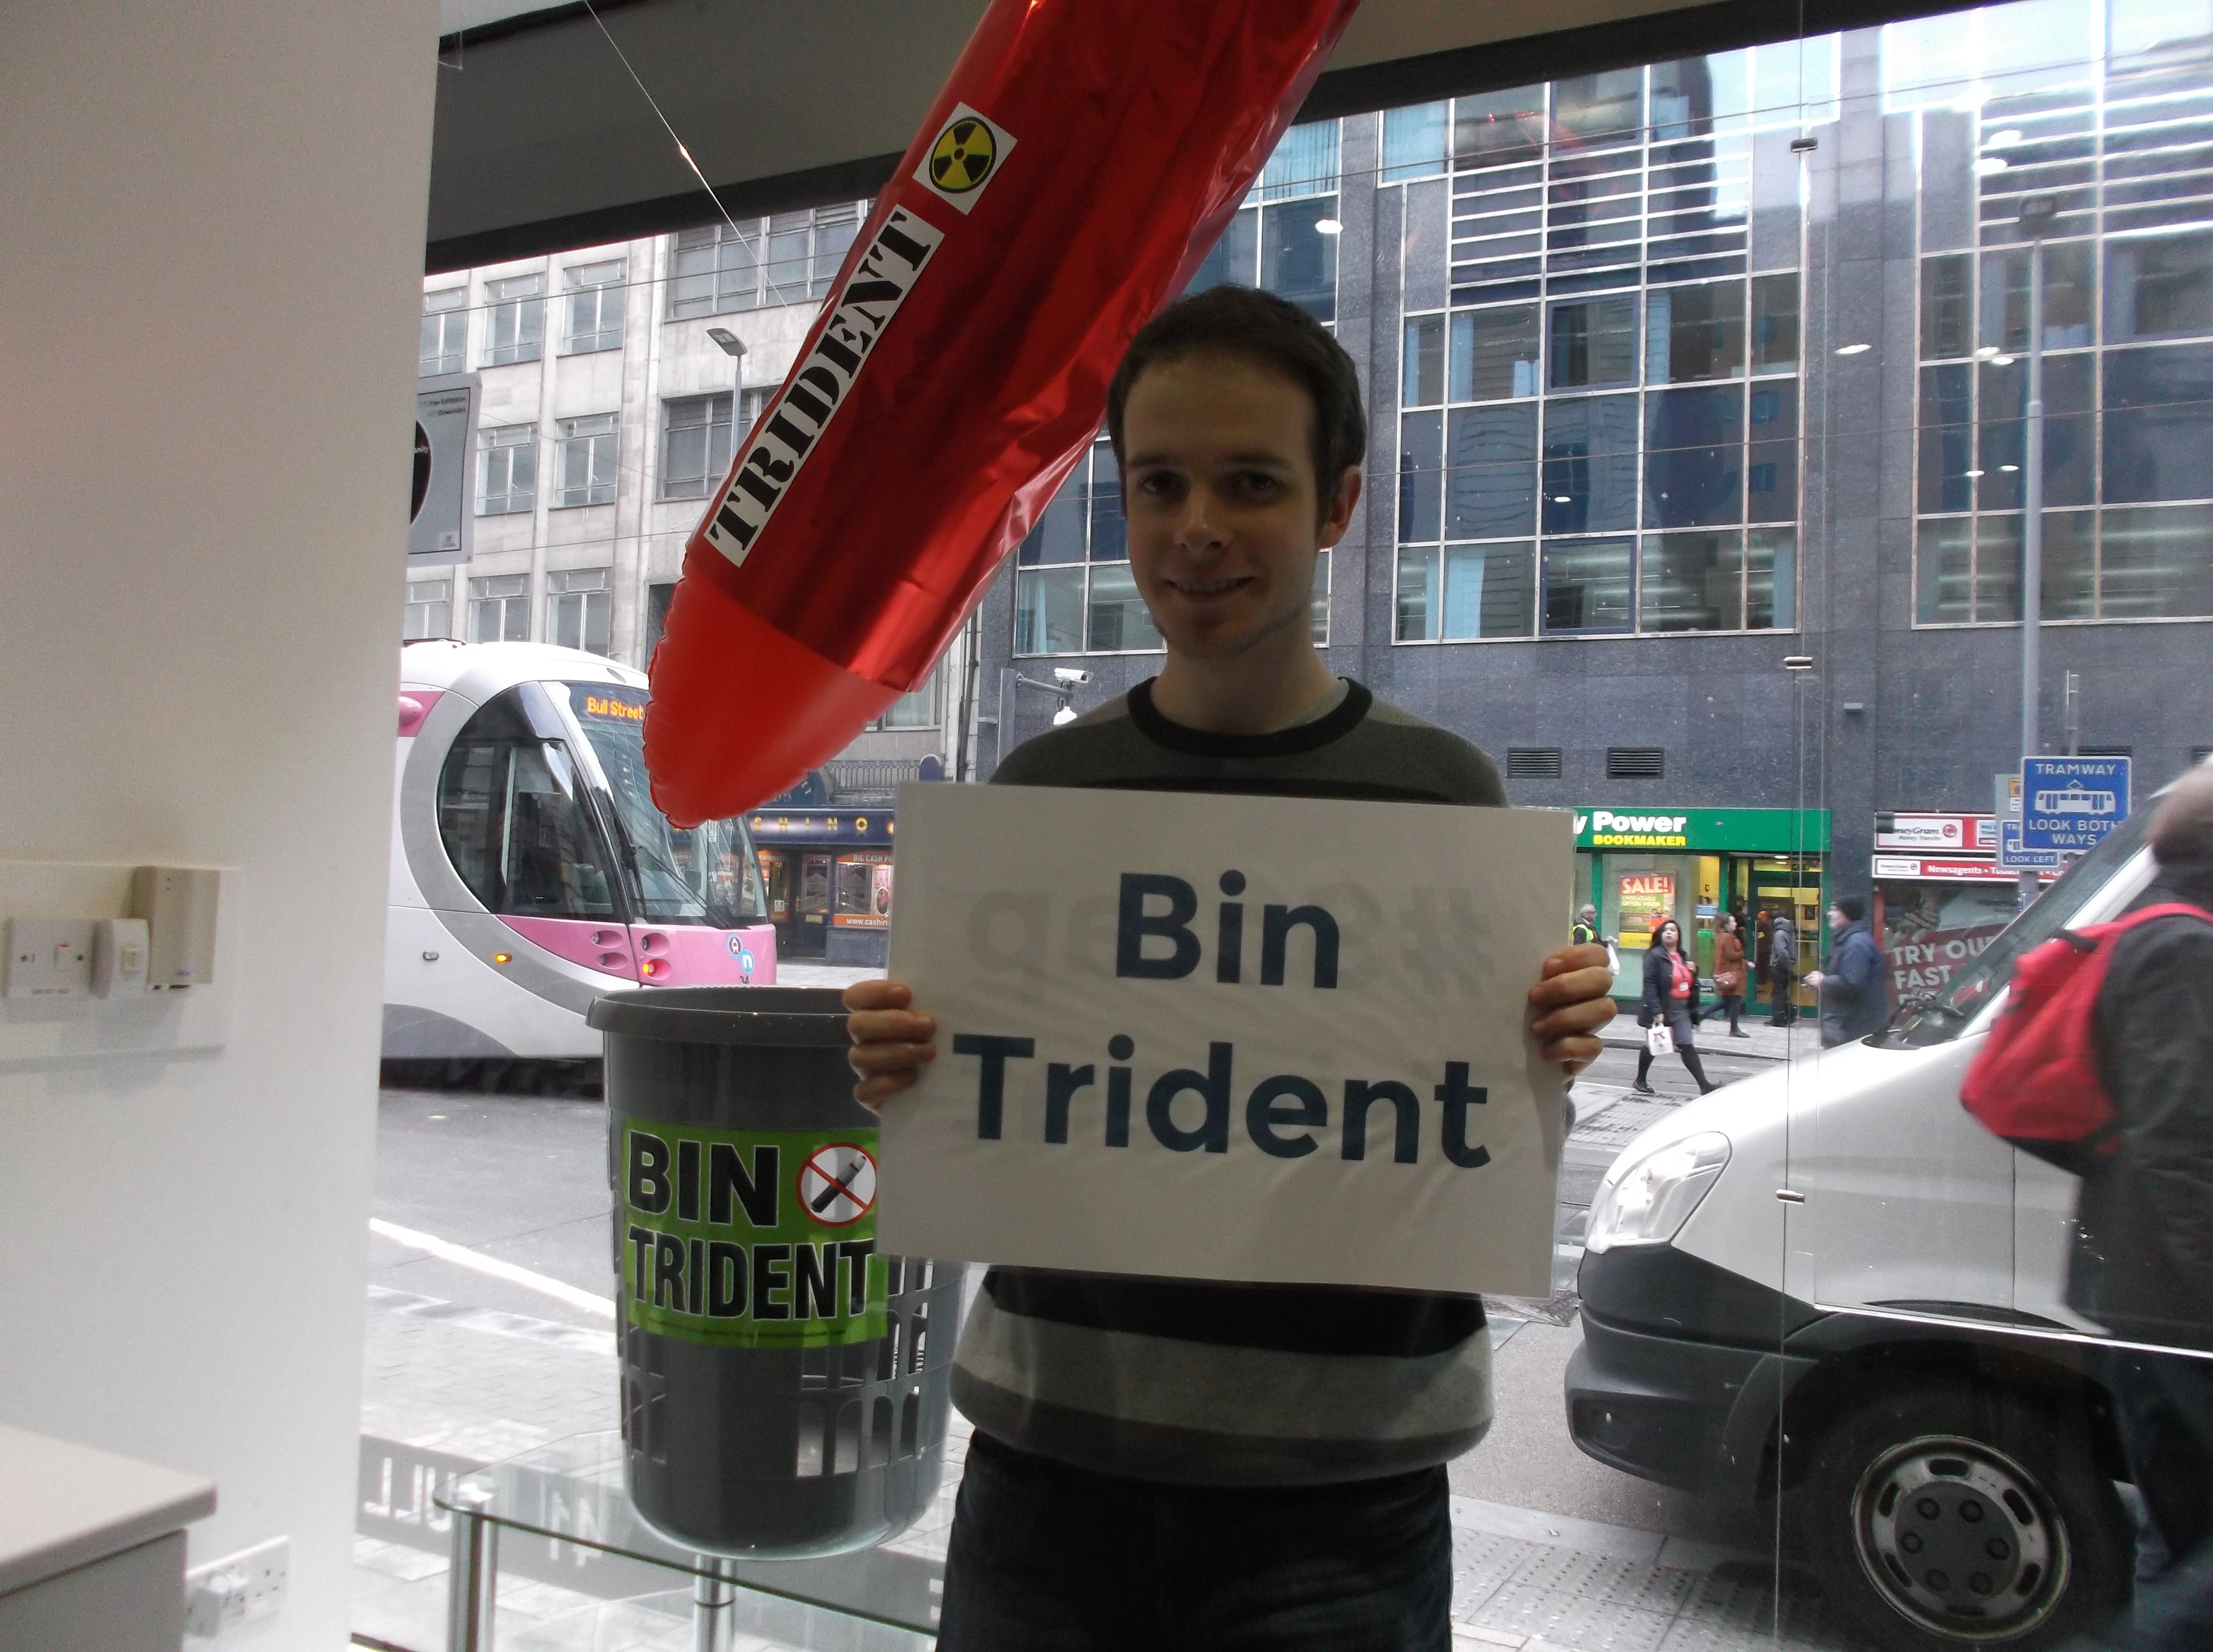 Time to Bin Trident